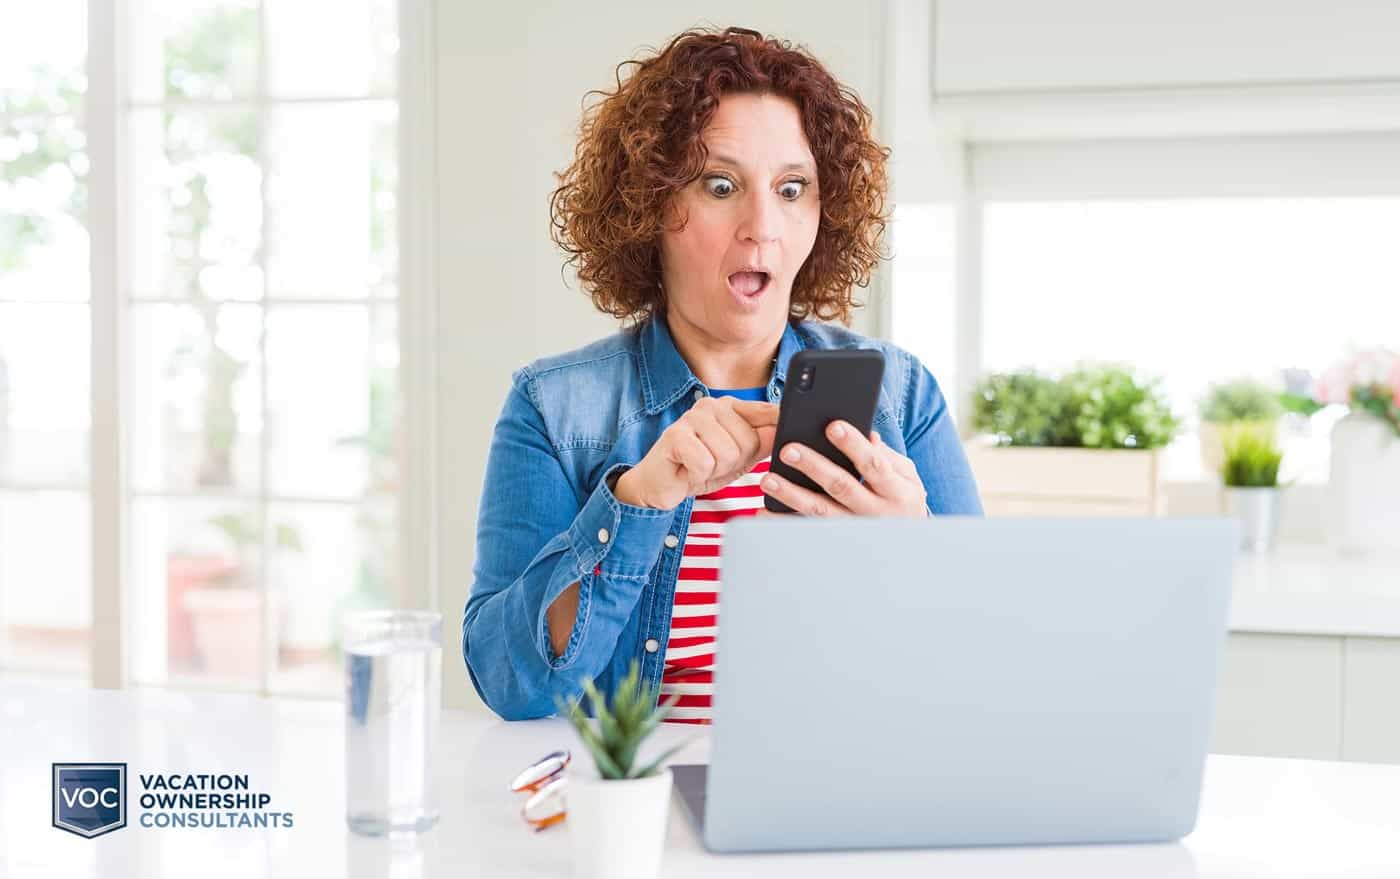 woman-looking-at-phone-while-on-computer-researching-resort-relief-programs-online-toget-rid-of-contractual-agreements-and-she-found-something-surprising